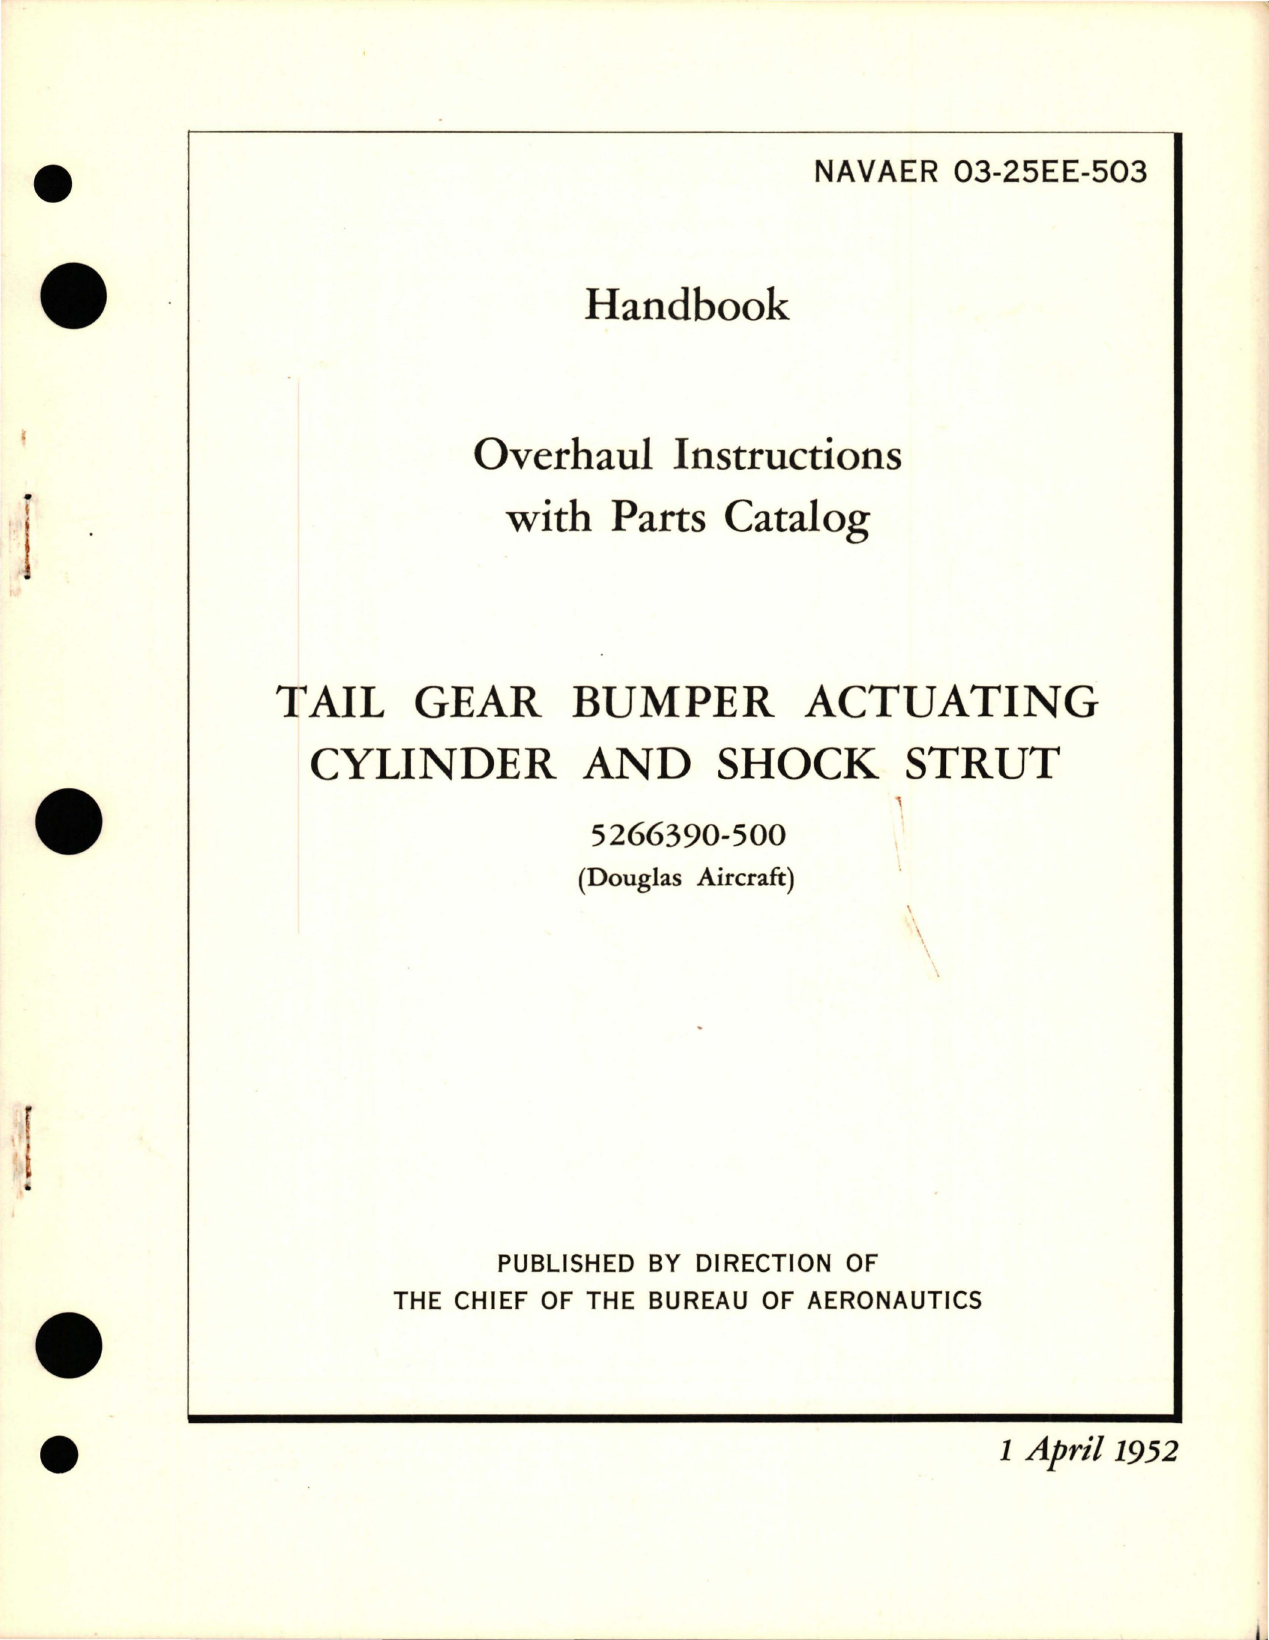 Sample page 1 from AirCorps Library document: Overhaul Instructions with Parts Catalog for Tail Gear Bumper Actuating Cylinder and Shock Strut - 5266390-500